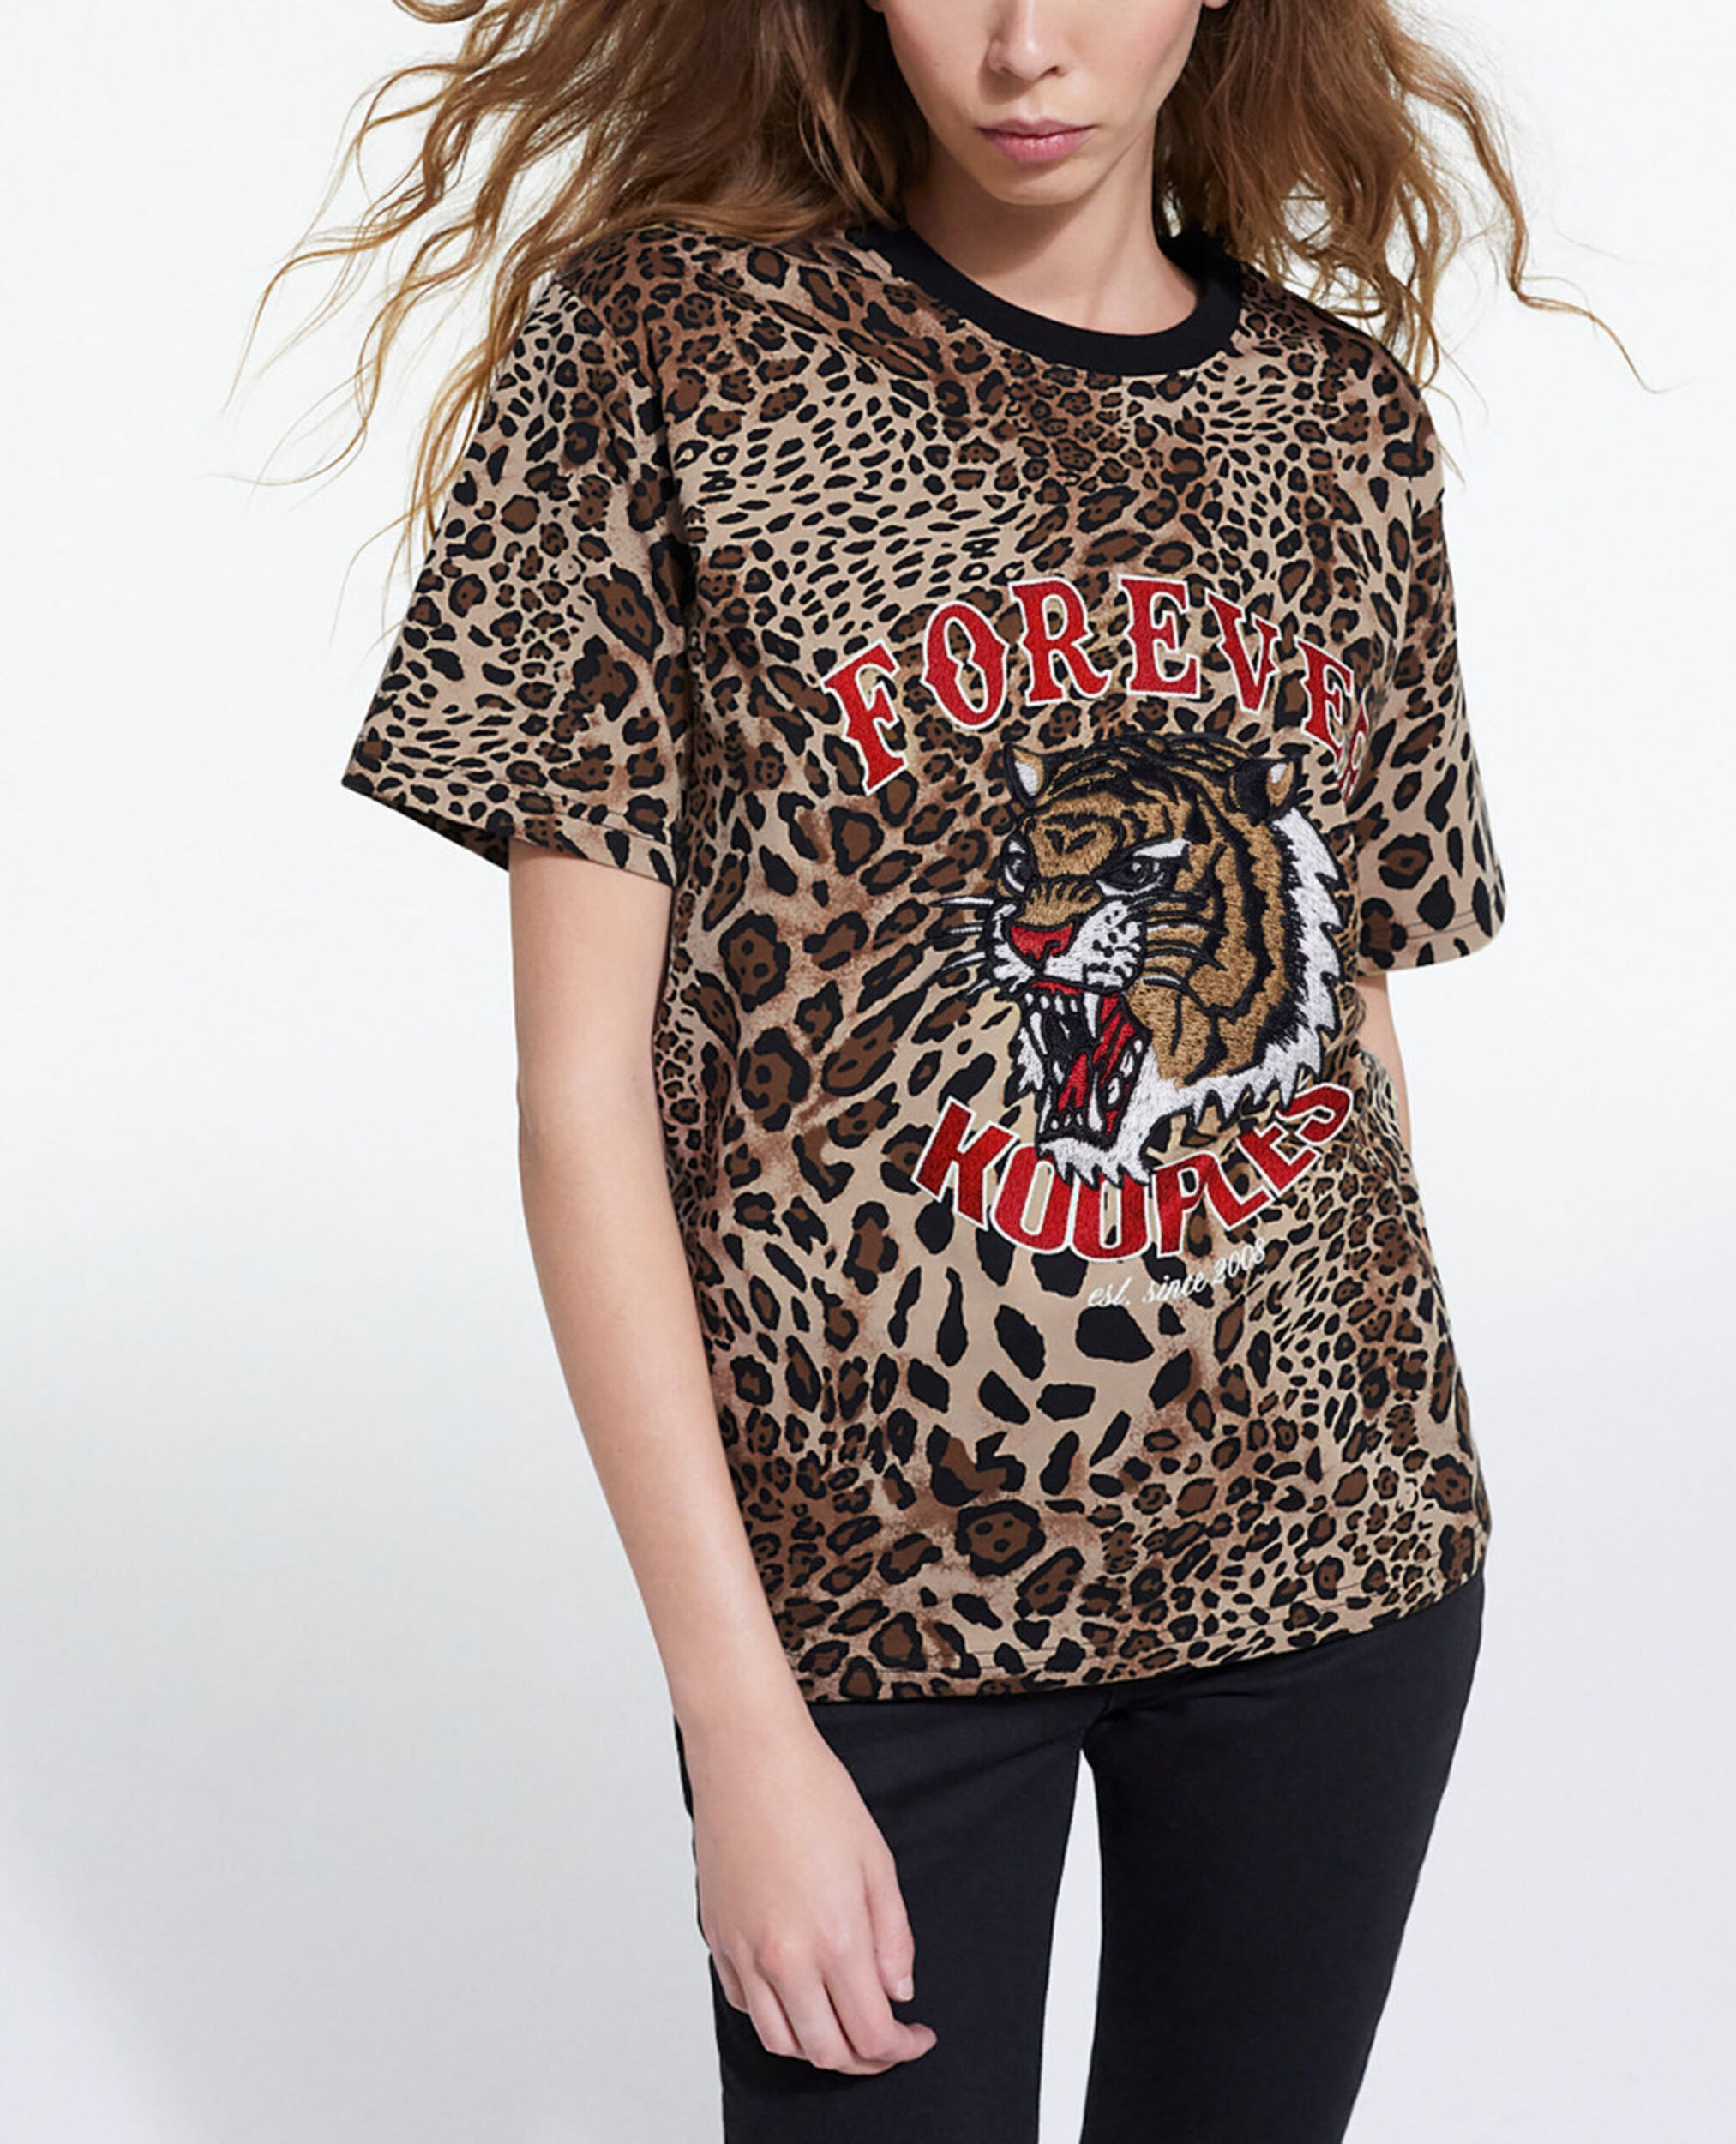 Baumwoll-T-Shirt mit Leopardenmuster, LEOPARD, hi-res image number null